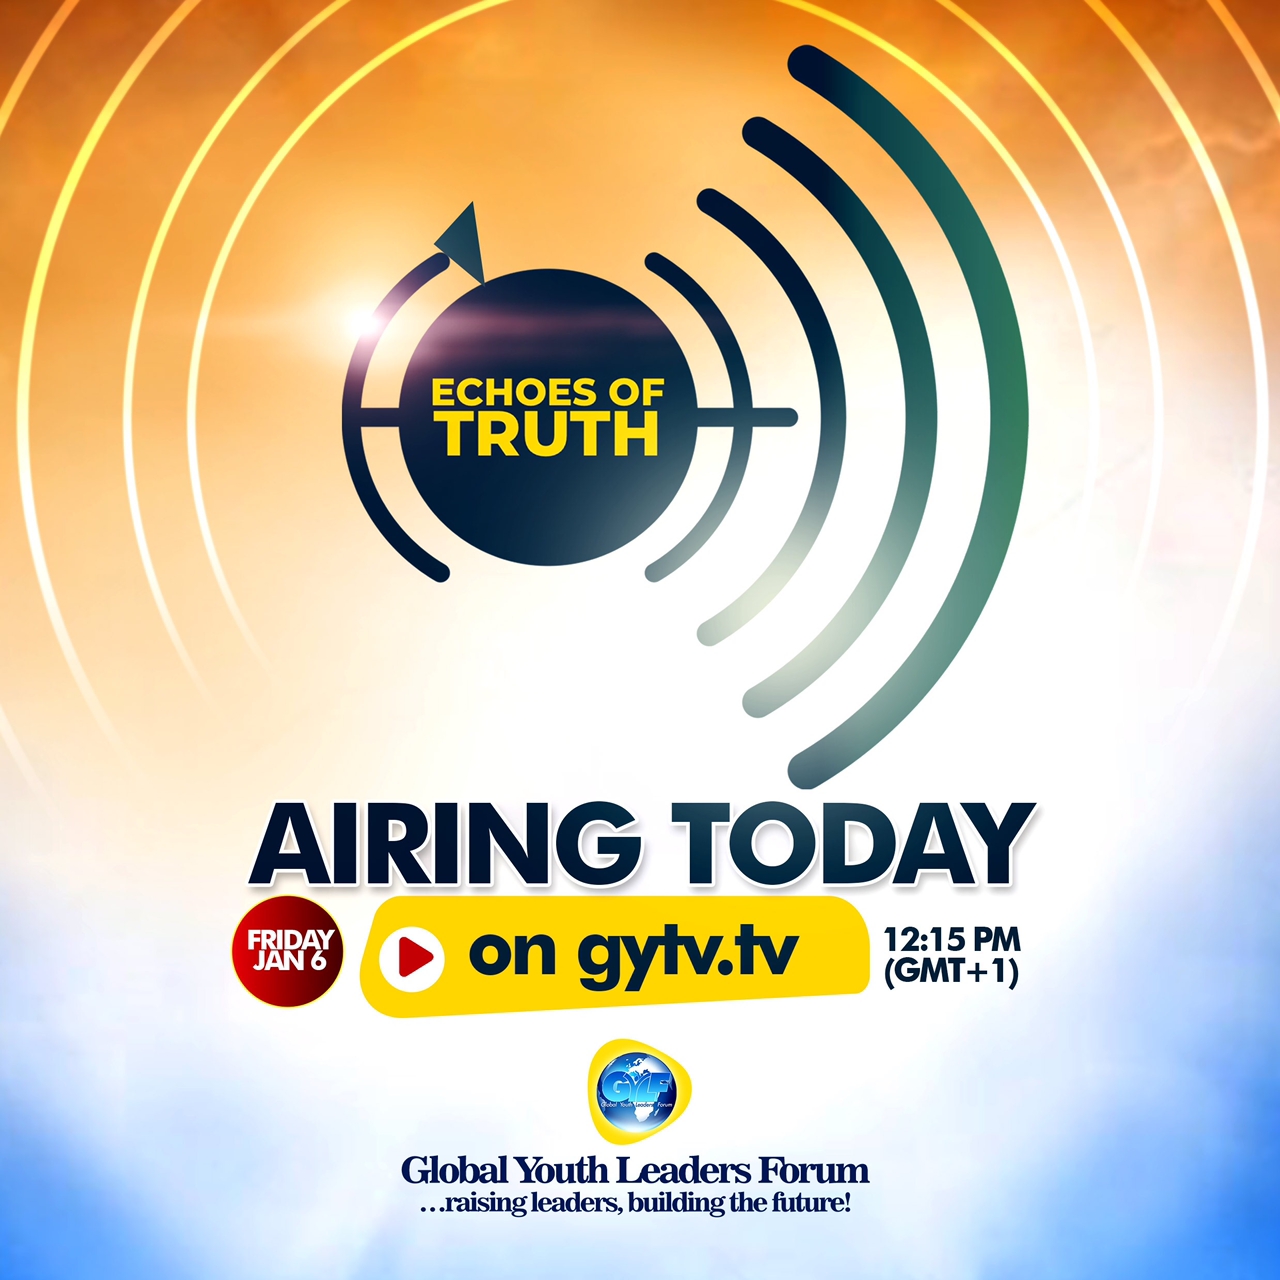 JOIN US FOR A RIDE OF TRUTH TODAY!